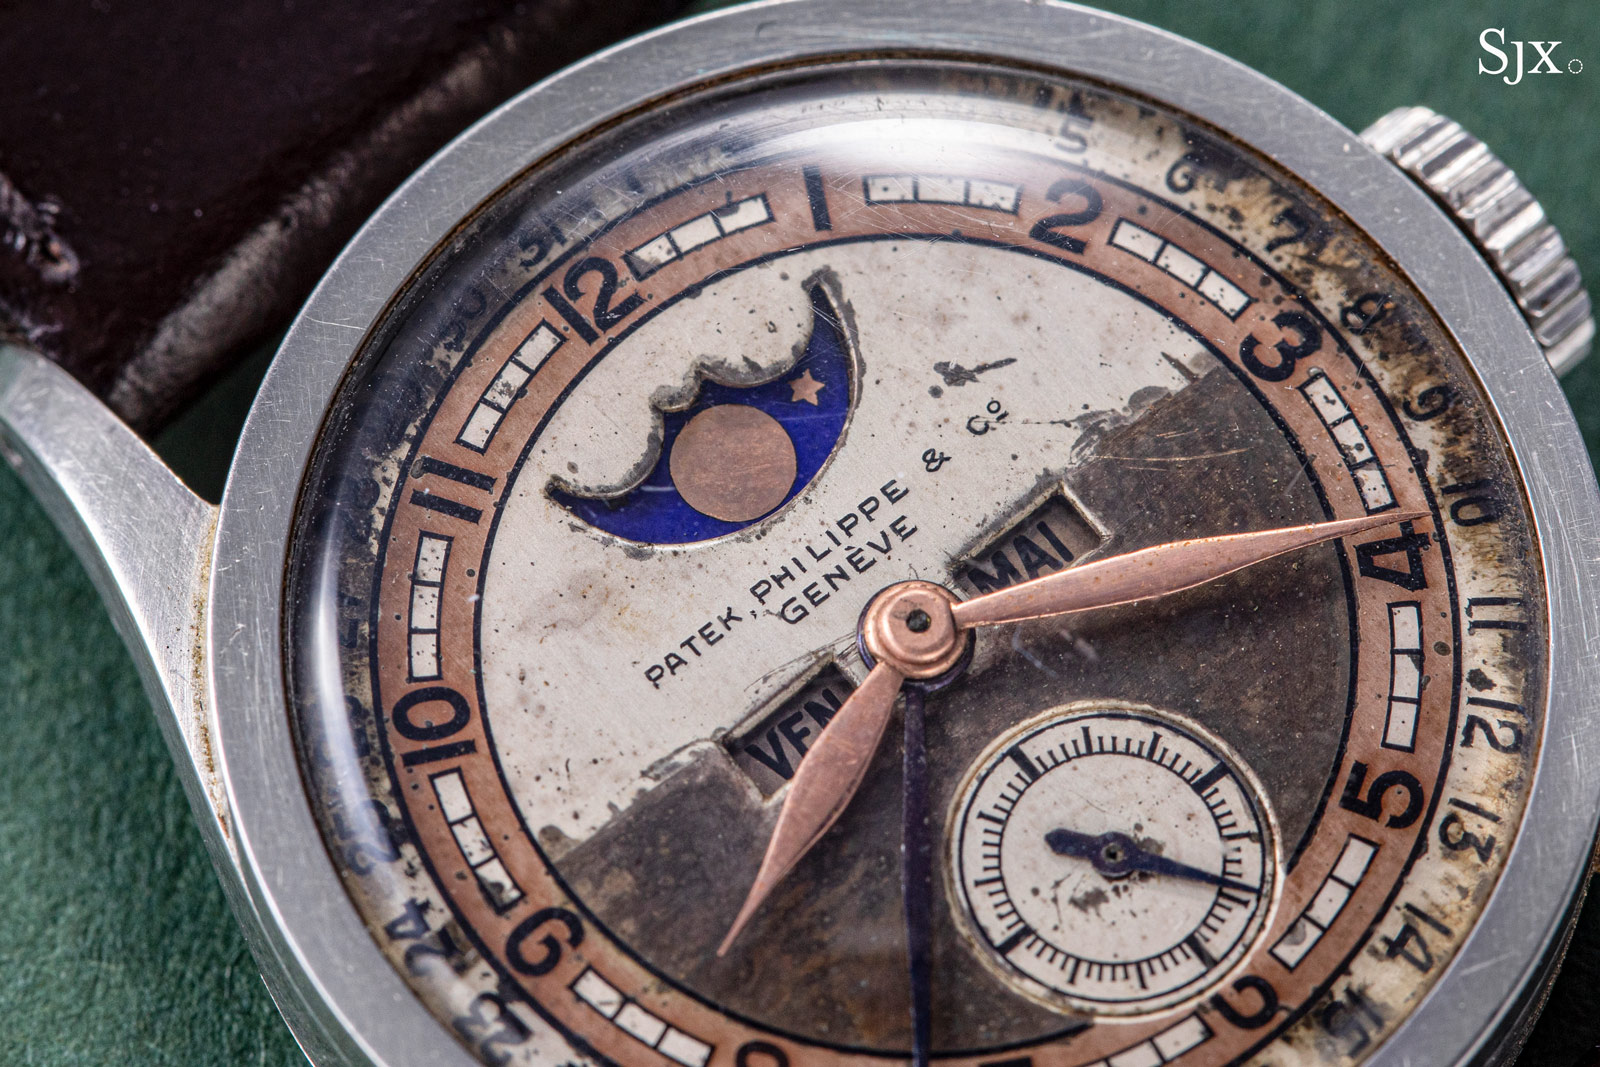 Up Close: The Imperial Patek Philippe Owned by the Last Emperor of ...